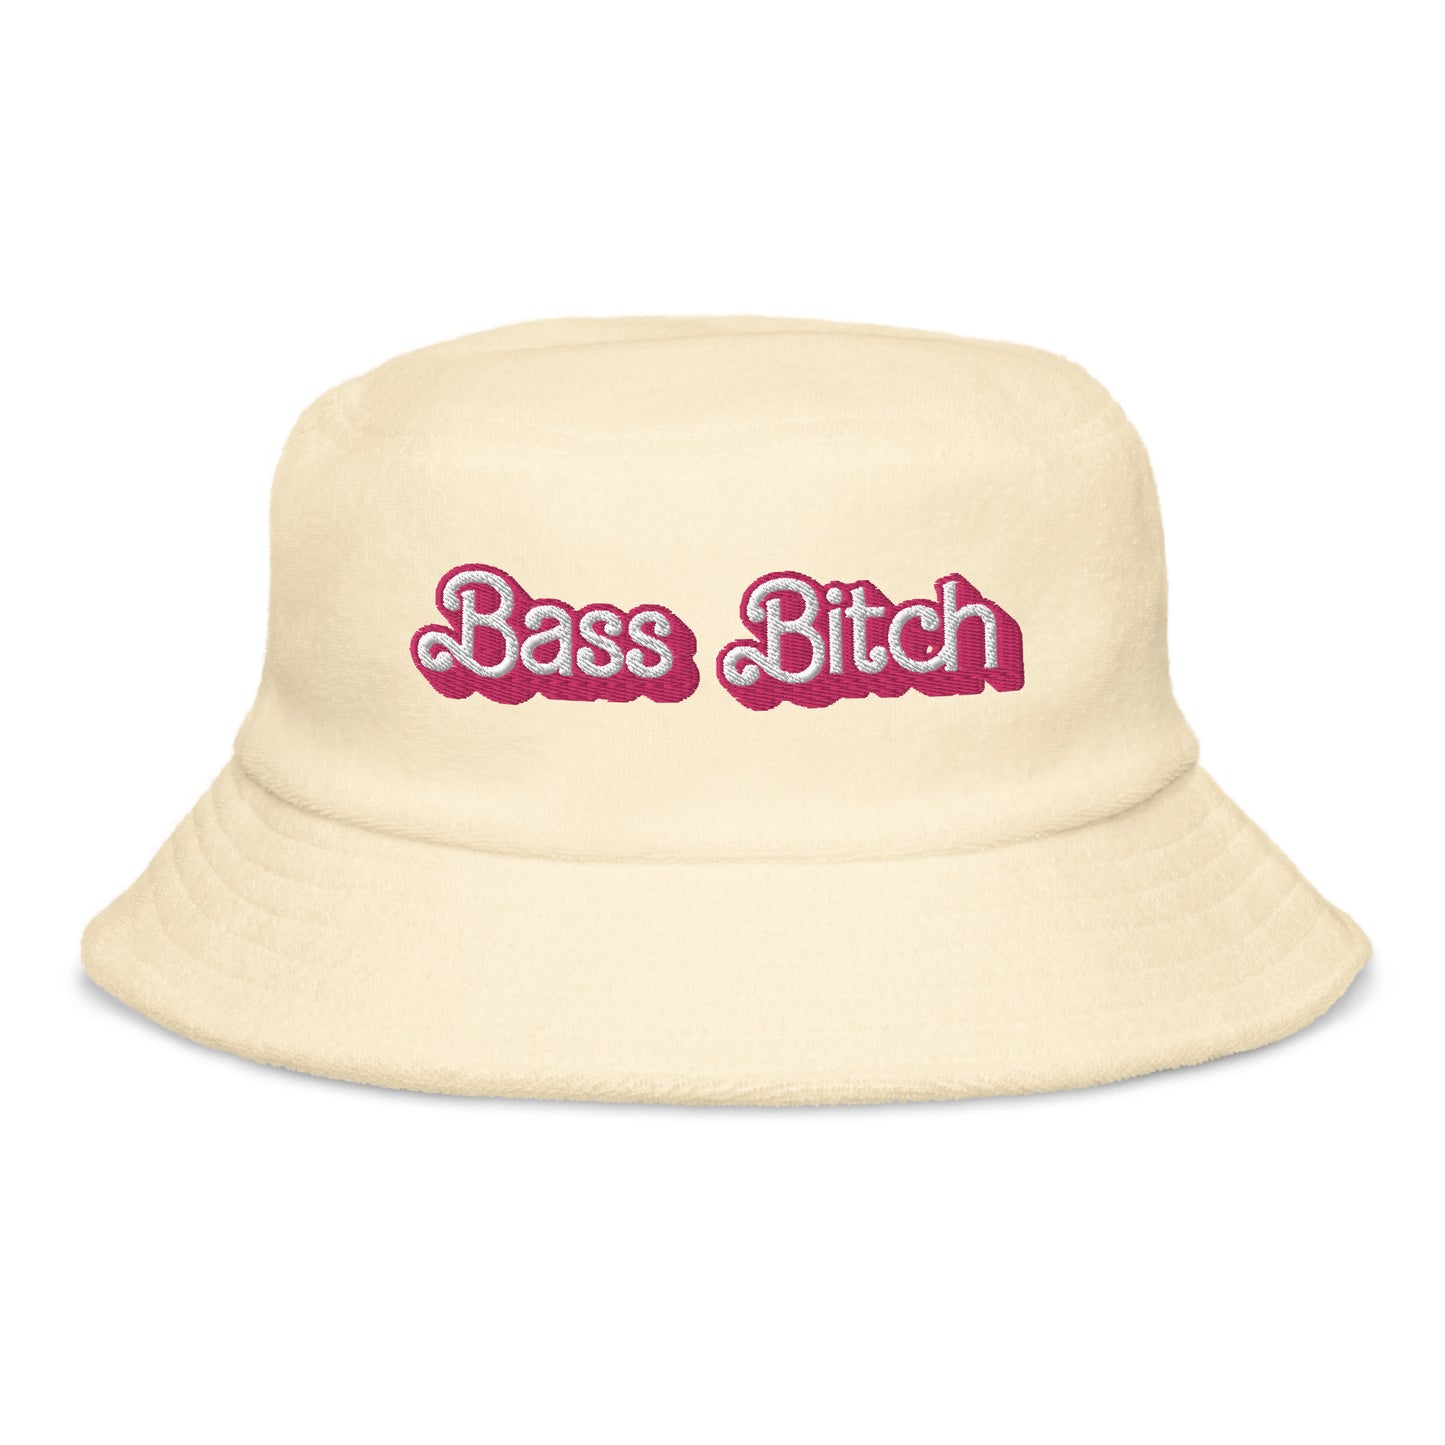 Dolly Font Bass Bitch Pastel Unisex Embroidered Terry Cloth Bucket Hat